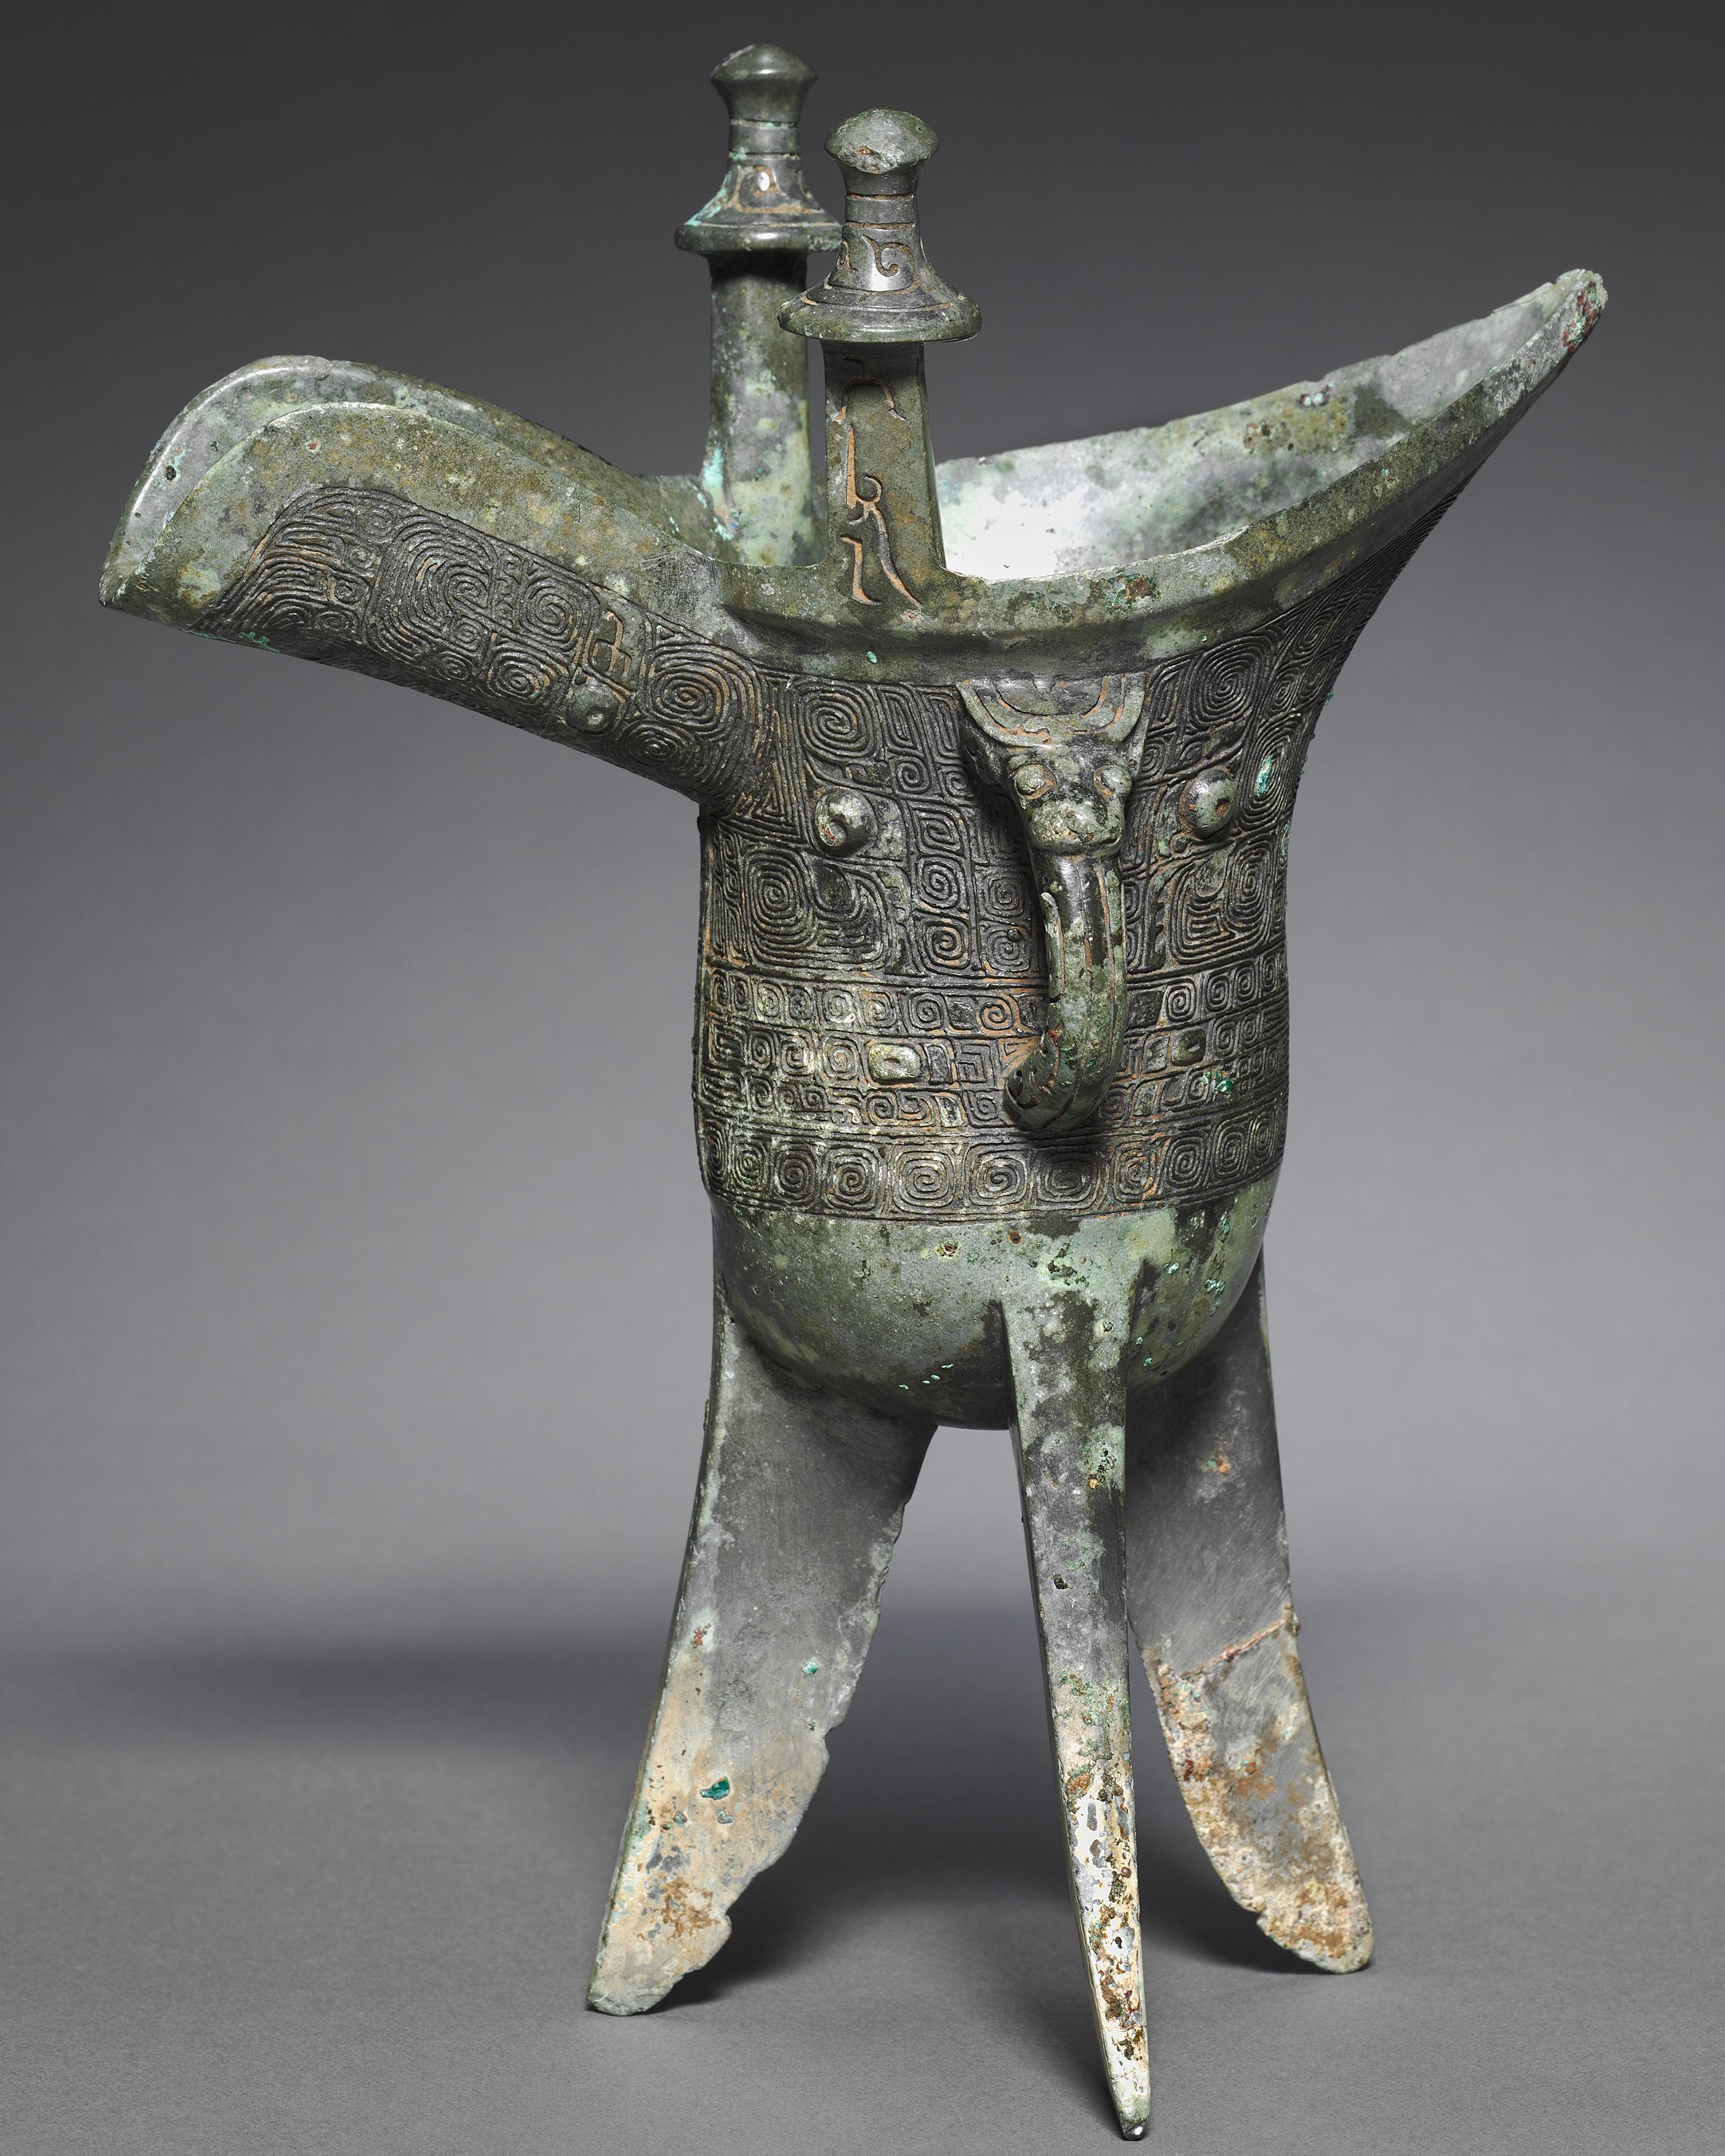 3,200-year-old bronze wine goblet on three legs, with spiral textures. China, Shang dynasty, 1200 BC.jpg